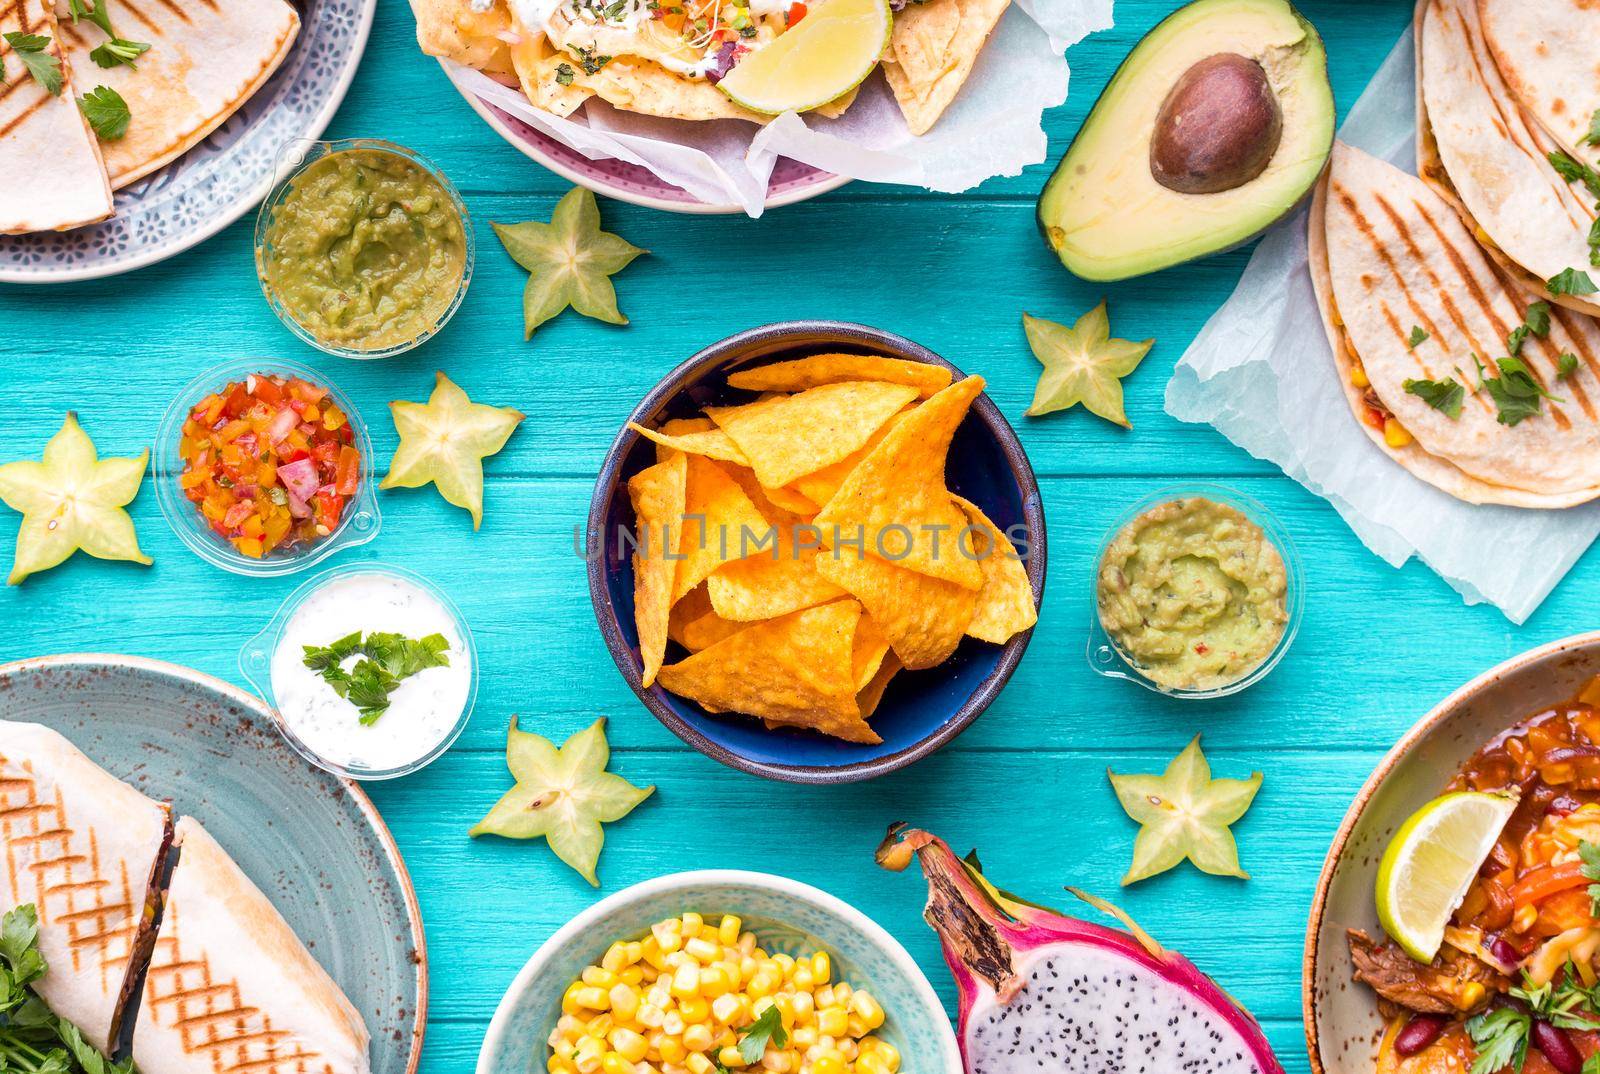 Assorted mix of traditional Mexican food. Different Mexican dishes table. Cheese nachos, tacos, guacamole, quesadilla, burrito, fajitas, tortilla chips, Mexican fruits. Tex-Mex cuisine. Mexico style